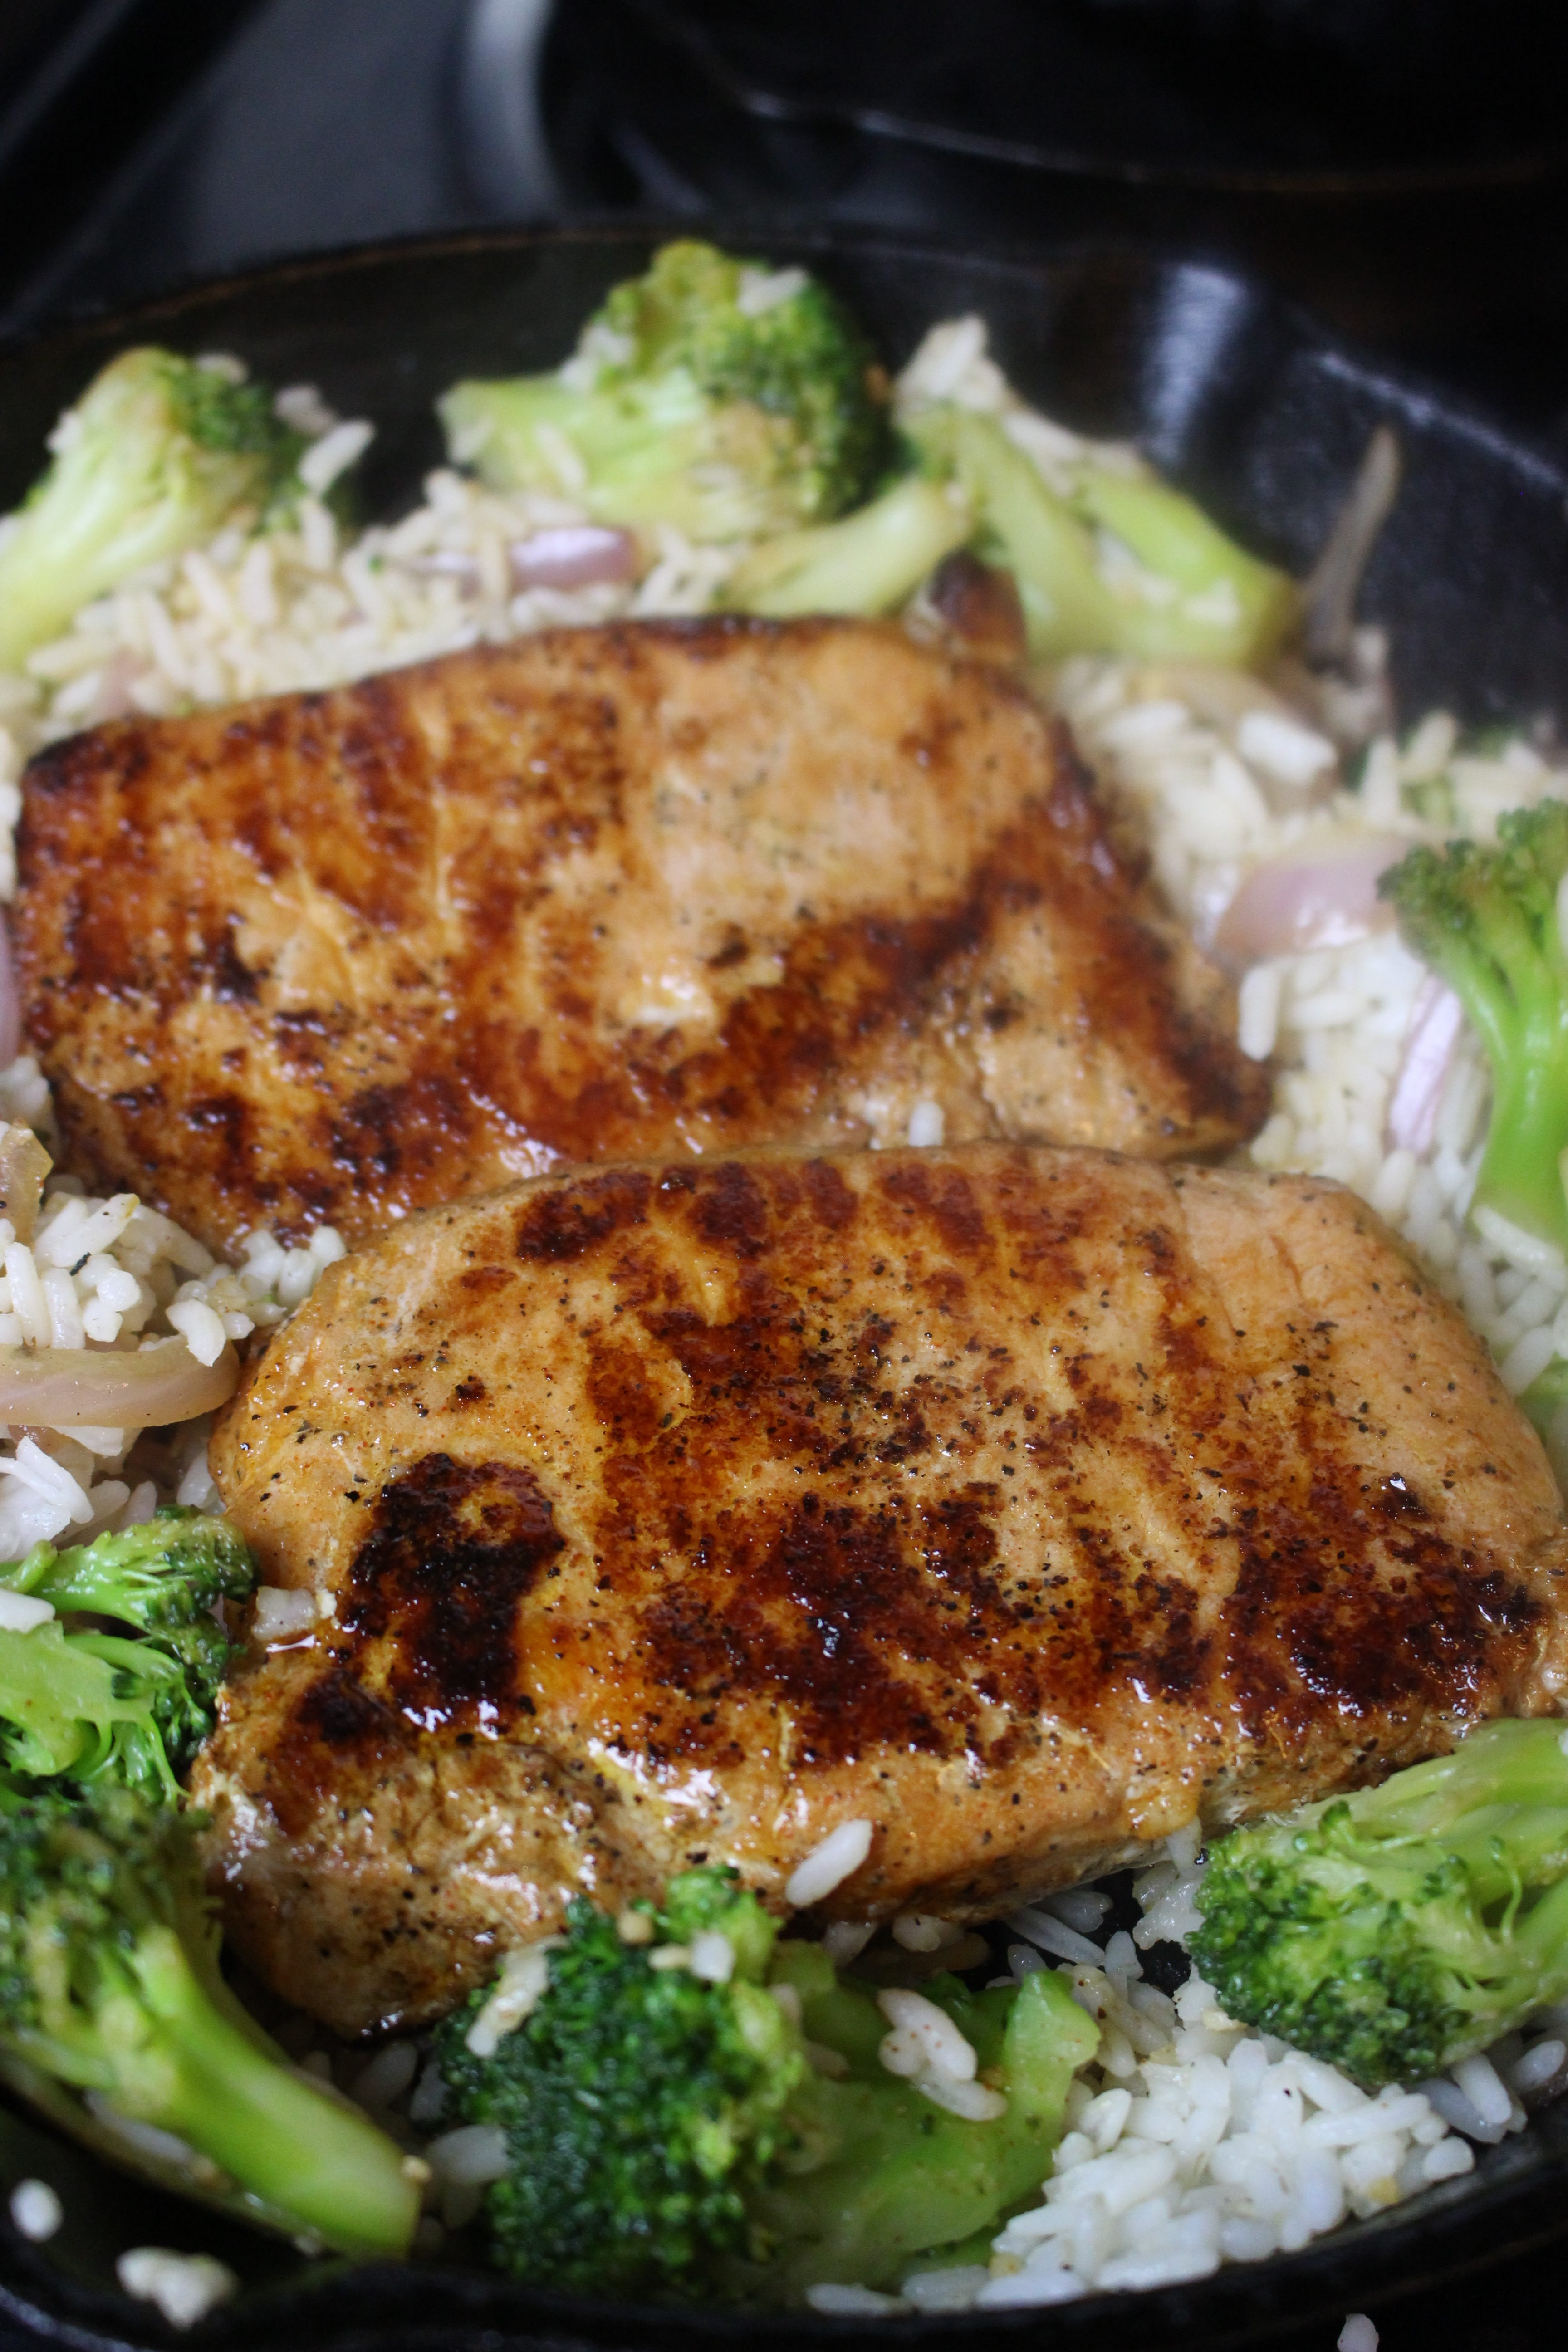 Seasoned pork chops on a bed of tender rice and broccoli served in a cast iron skillet. A terrific family meal!